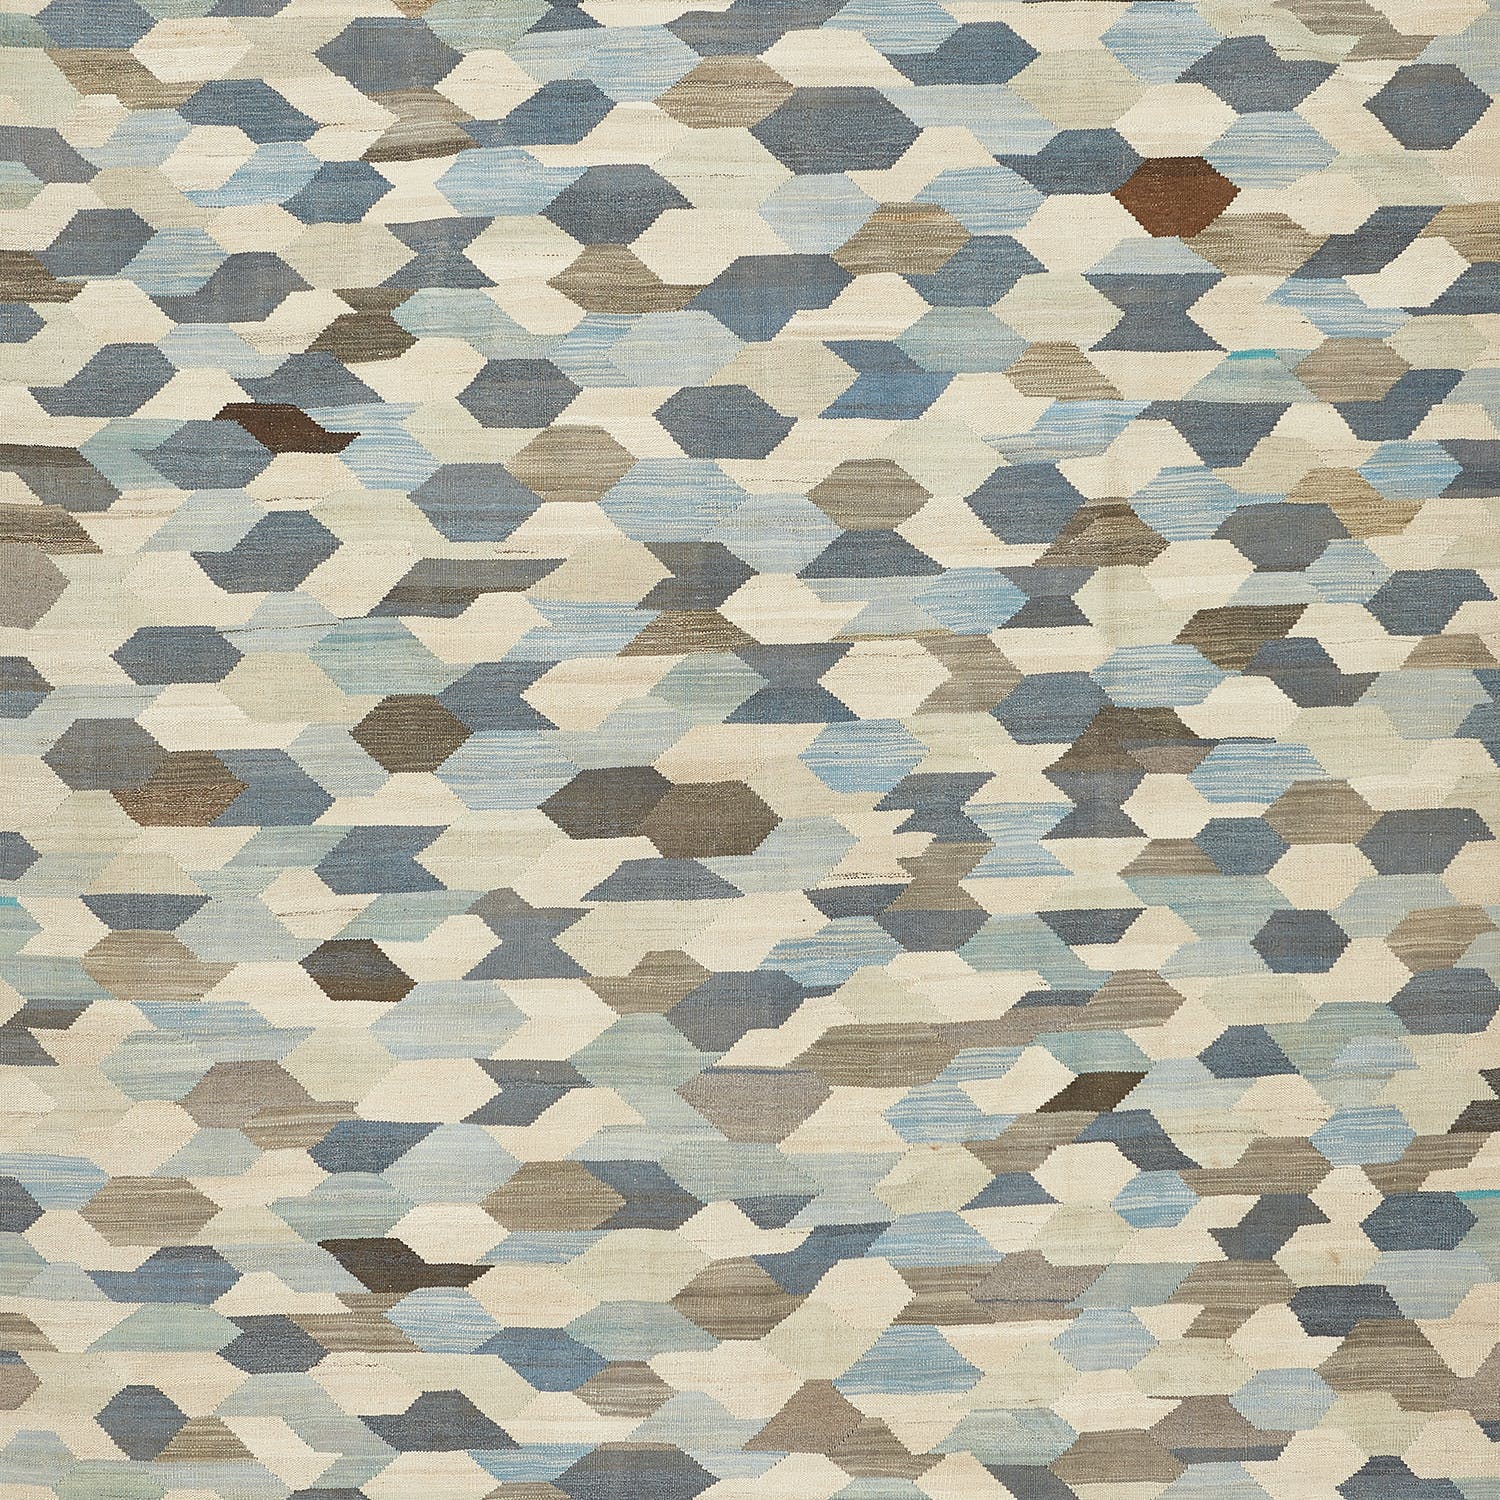 Abstract, mosaic-like pattern of irregular shapes in neutral tones.